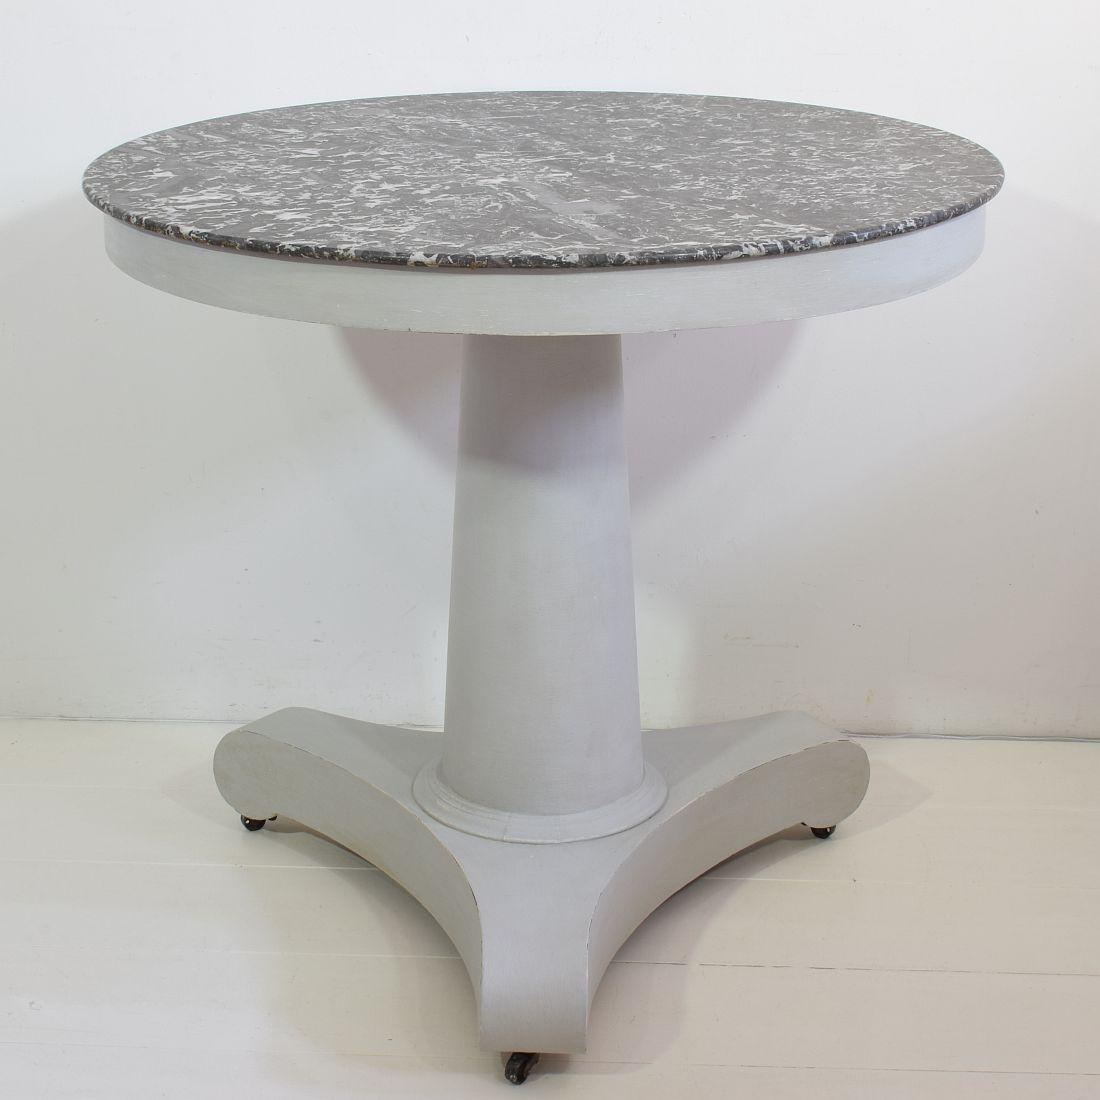 Hand-Painted French 19th Century Second Empire Gueridon Table with Black Marble Top